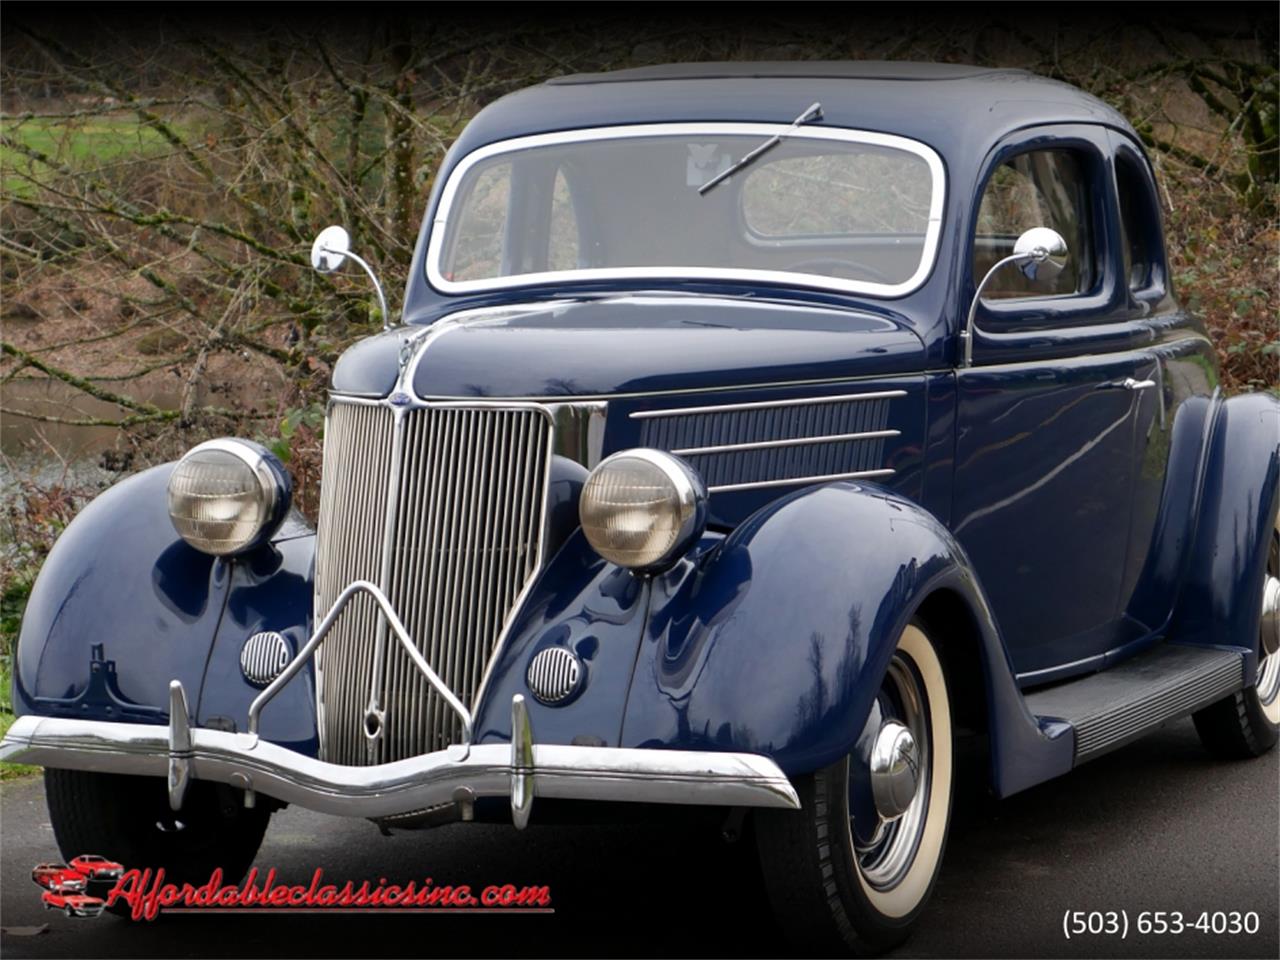 For Sale: 1936 Ford Coupe in Gladstone, Oregon for sale in Gladstone, OR